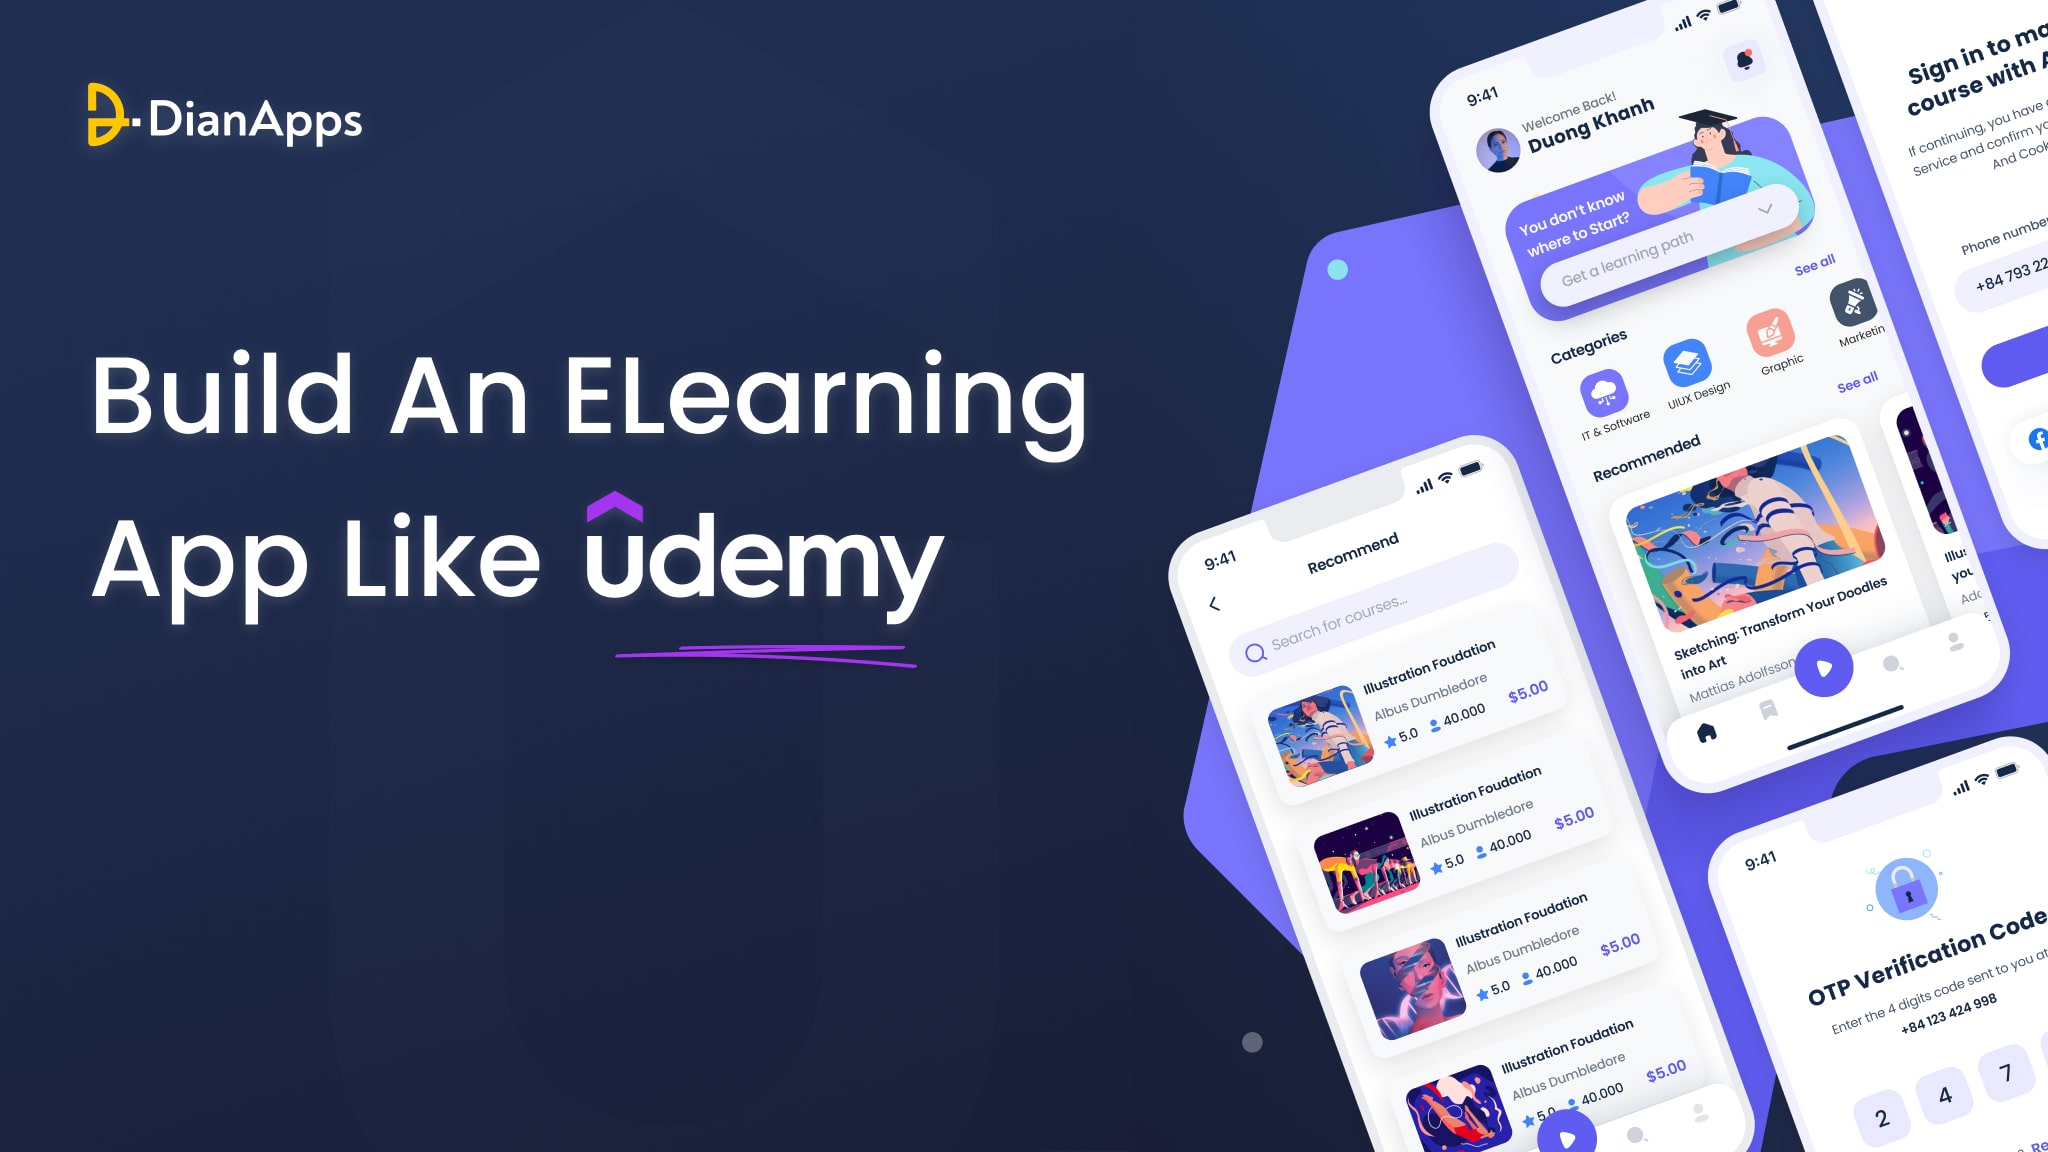 How To Build An ELearning App Like Udemy?